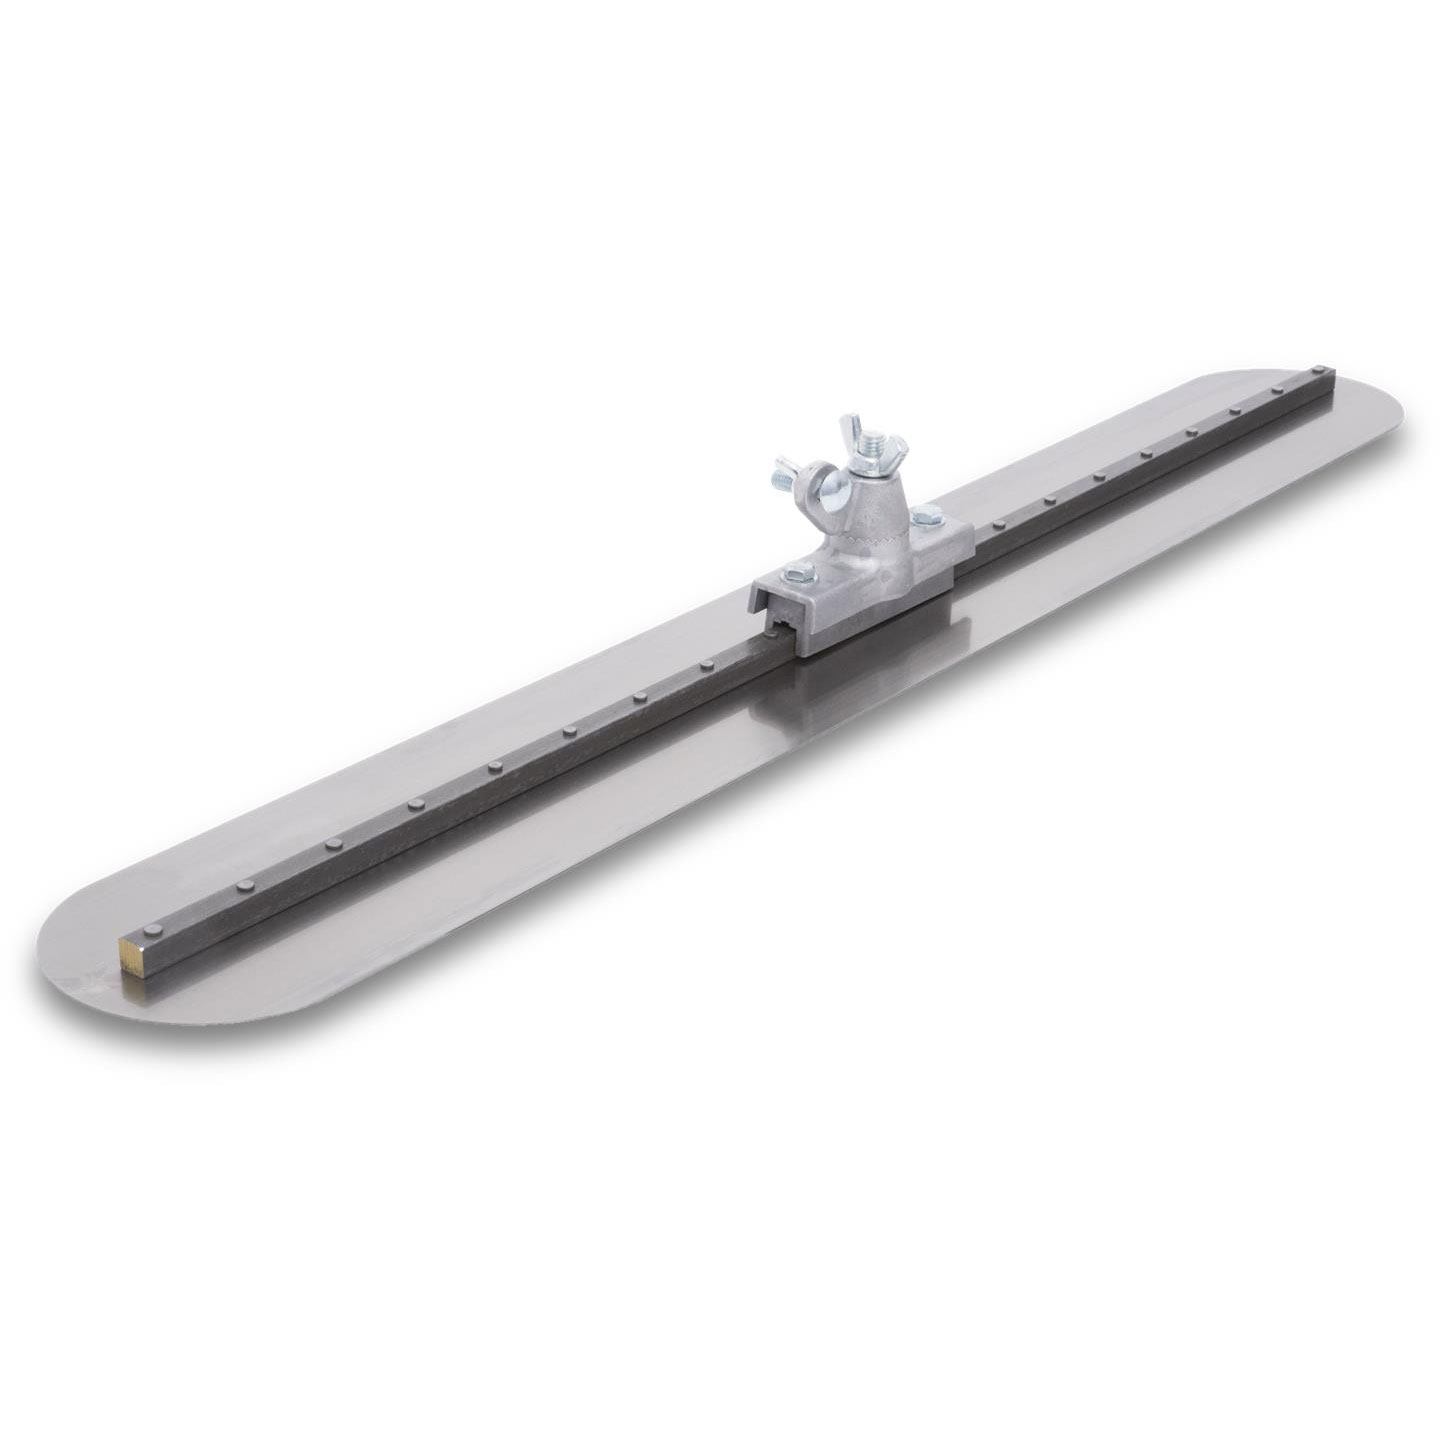 Marshalltown MC48RAA 48in. x 5in. Round End Fresno Trowel with All Angle Clevis Bracket MAT-MC48RAA